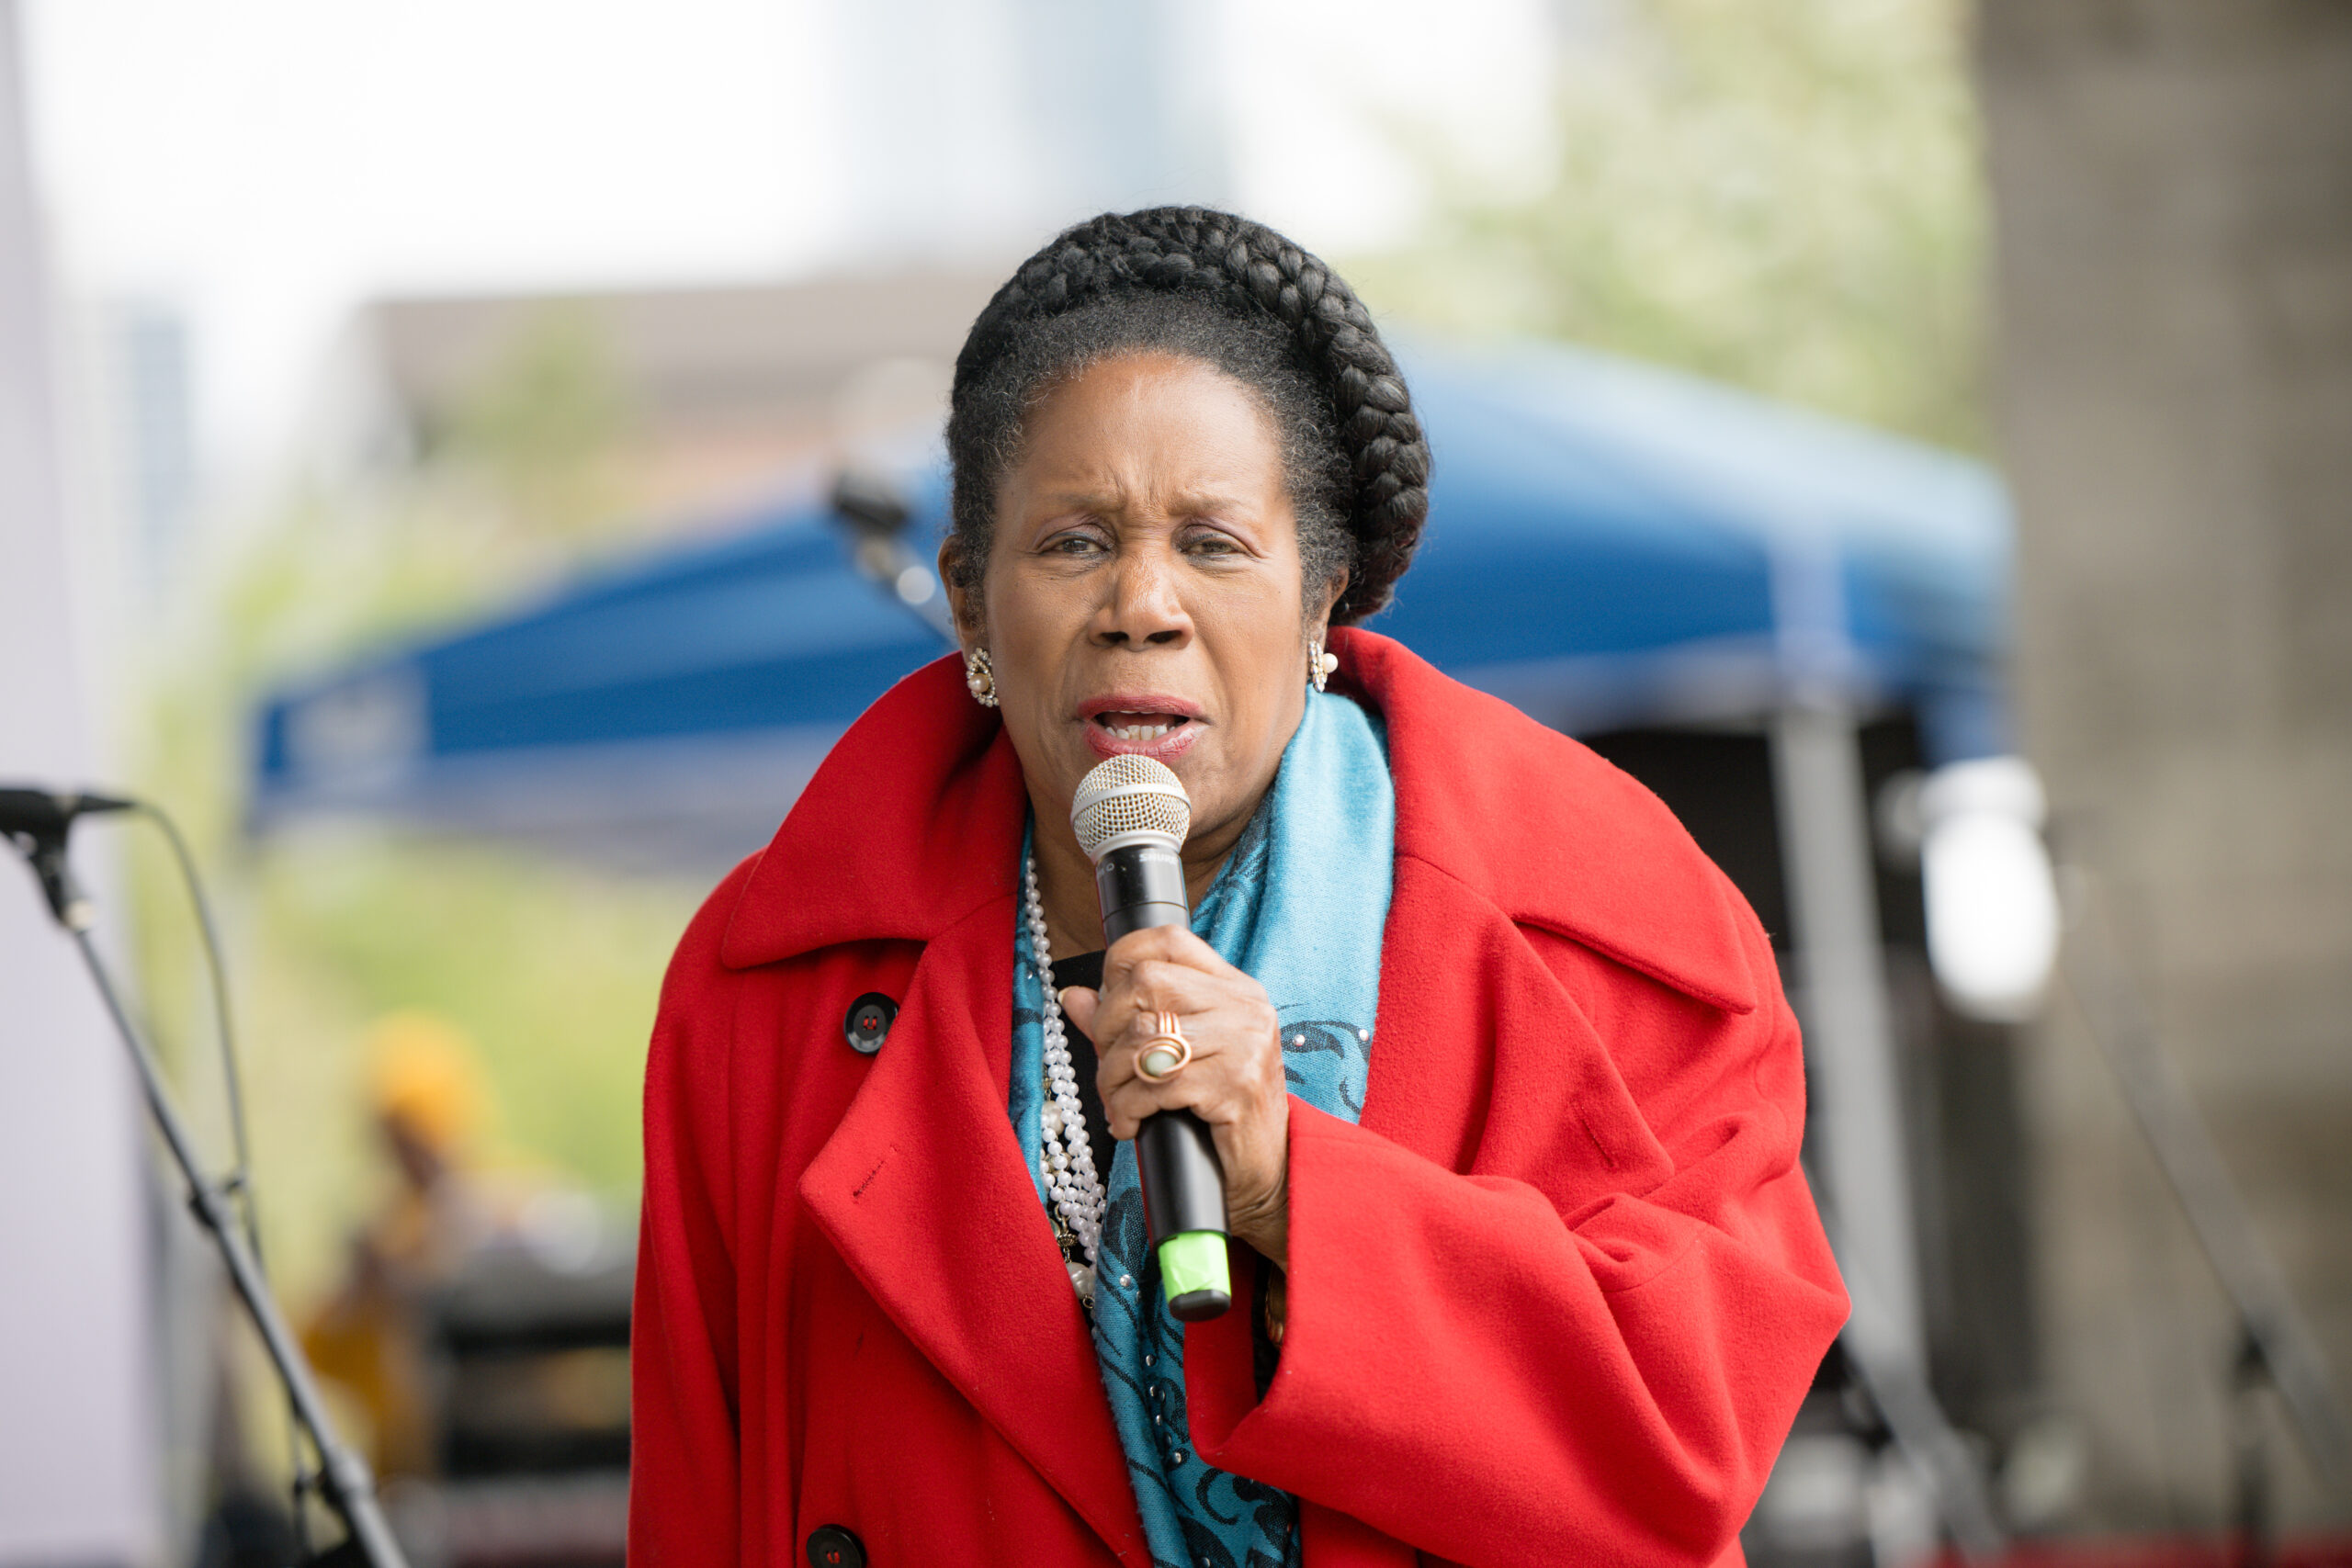 Democrat Sheila Jackson Lee Allegedly Caught Berating Staff: ‘Two G**d*** Big A** F***ing Idiots’